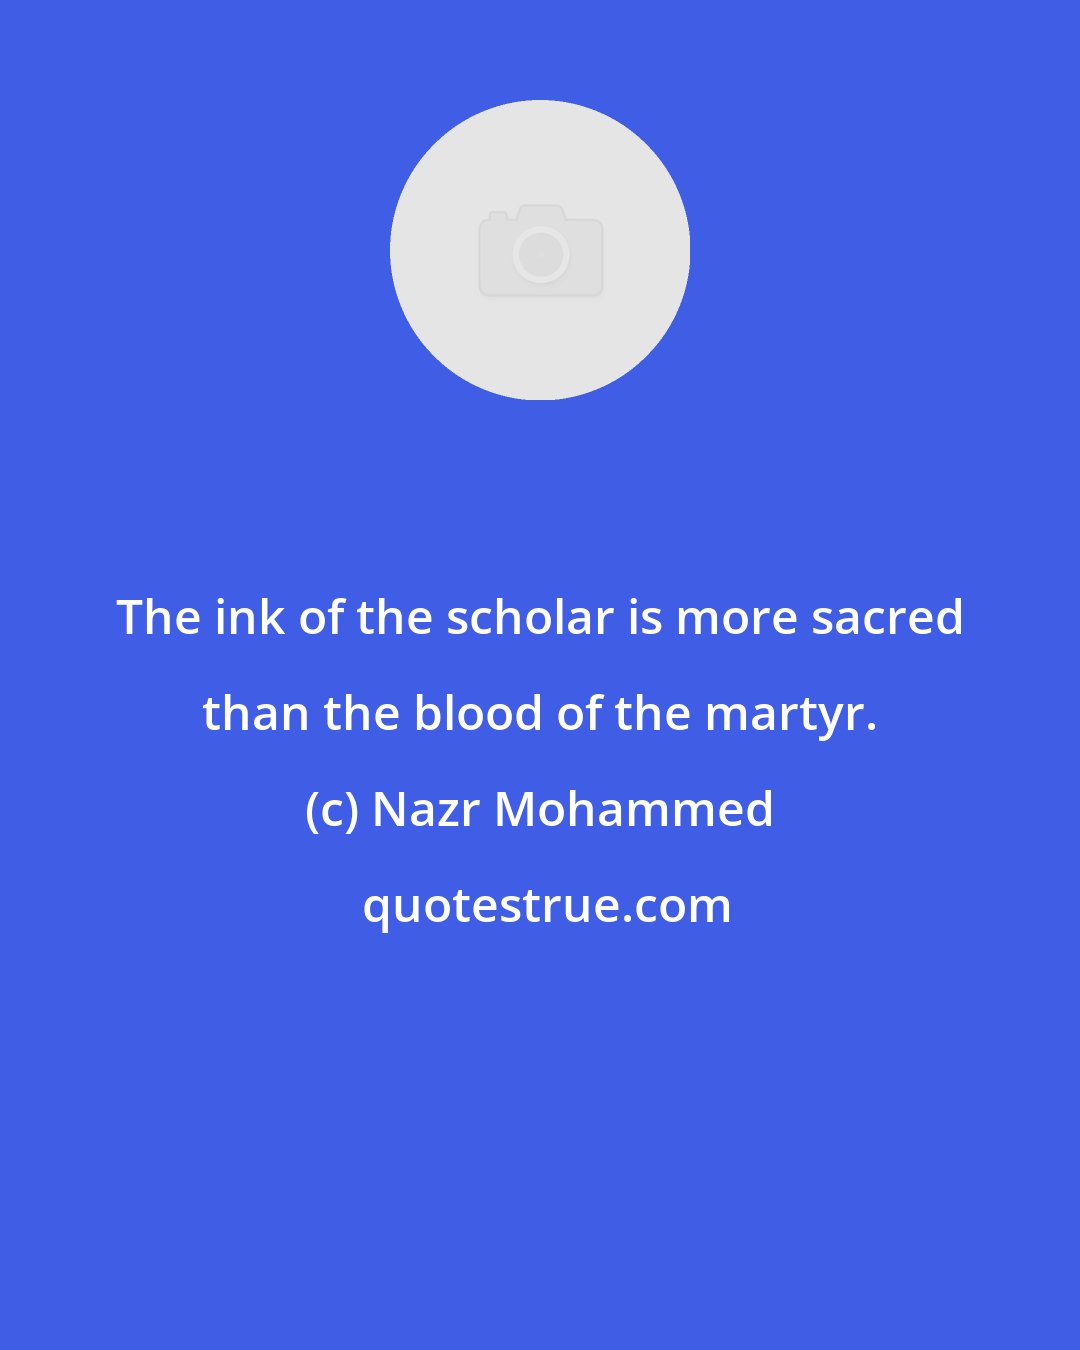 Nazr Mohammed: The ink of the scholar is more sacred than the blood of the martyr.